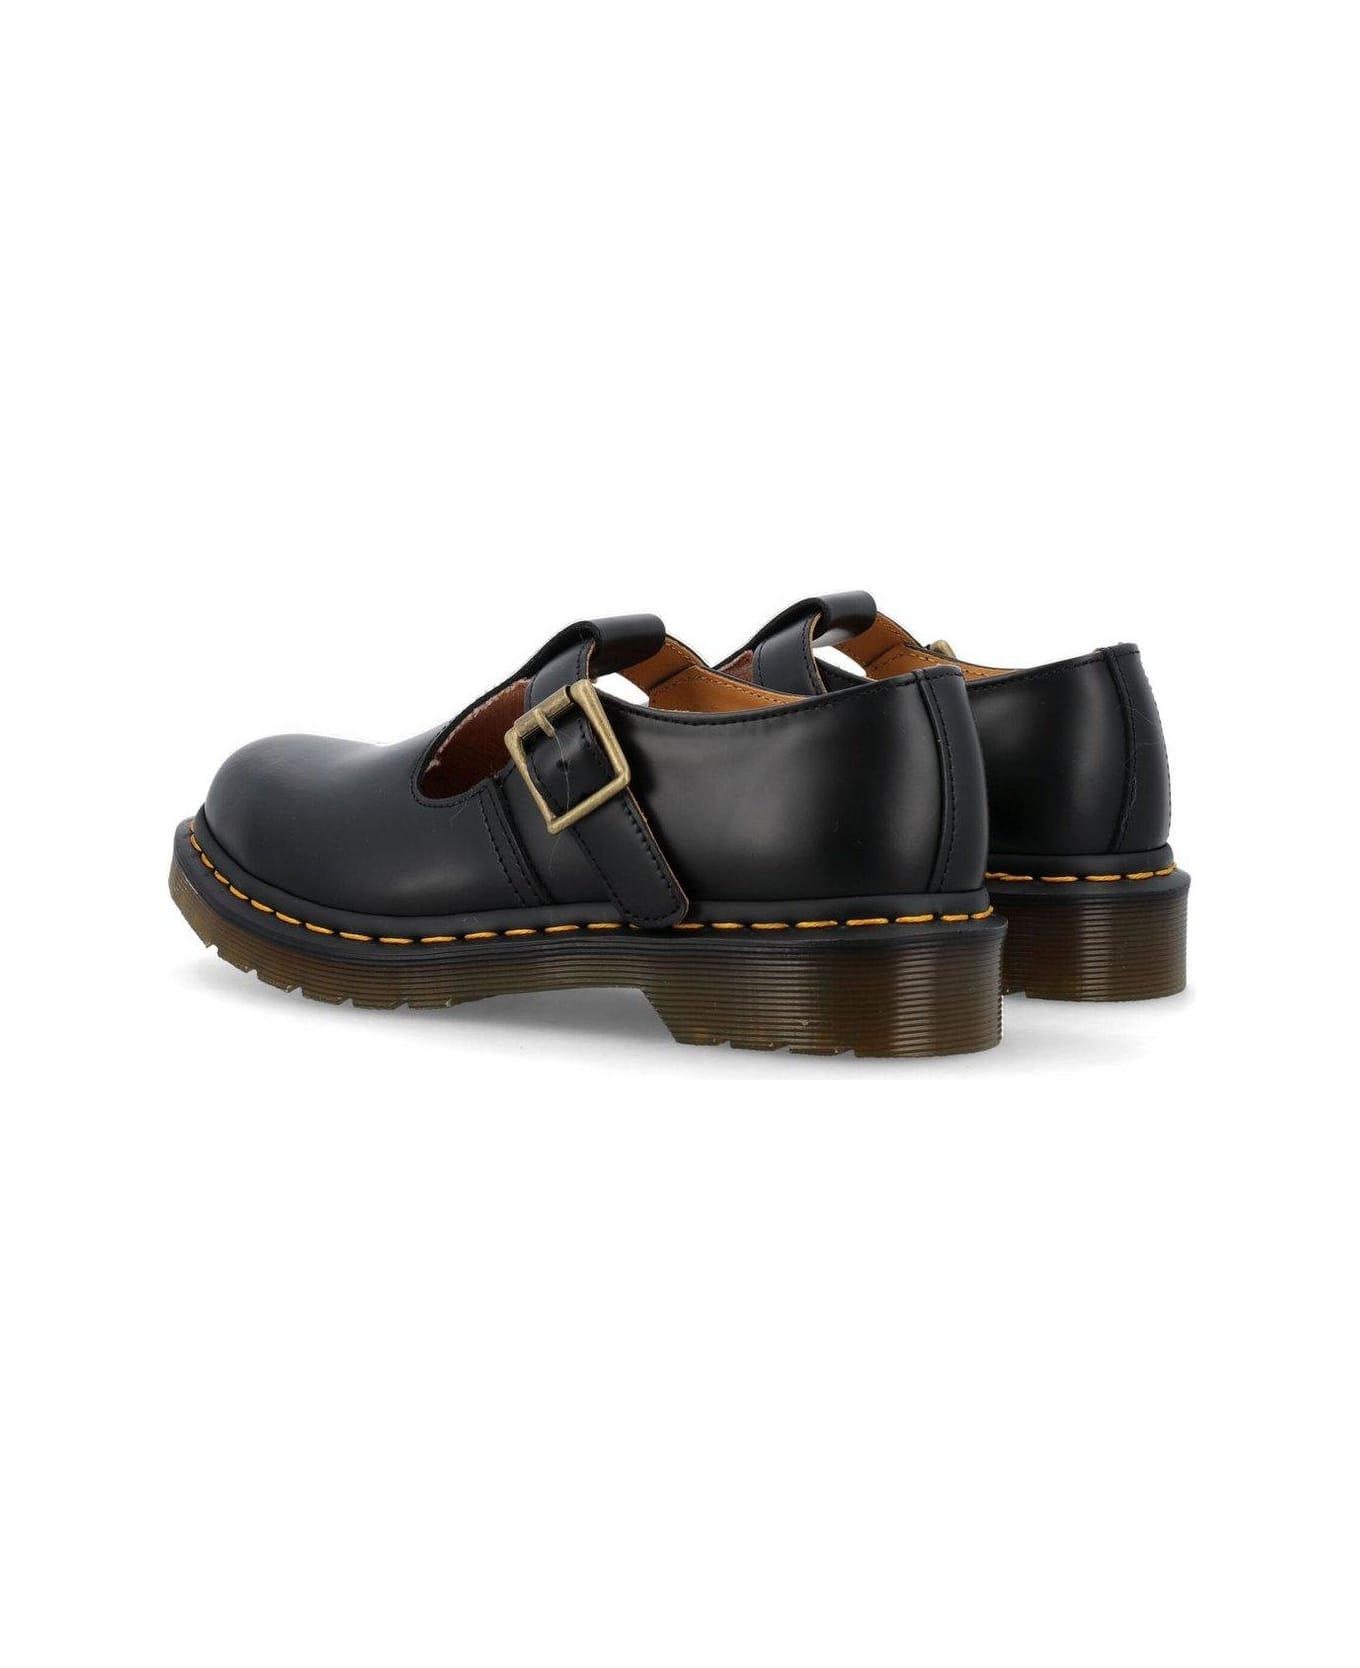 Dr. Martens Polley Mary Jane Flat Shoes - Black Smooth フラットシューズ